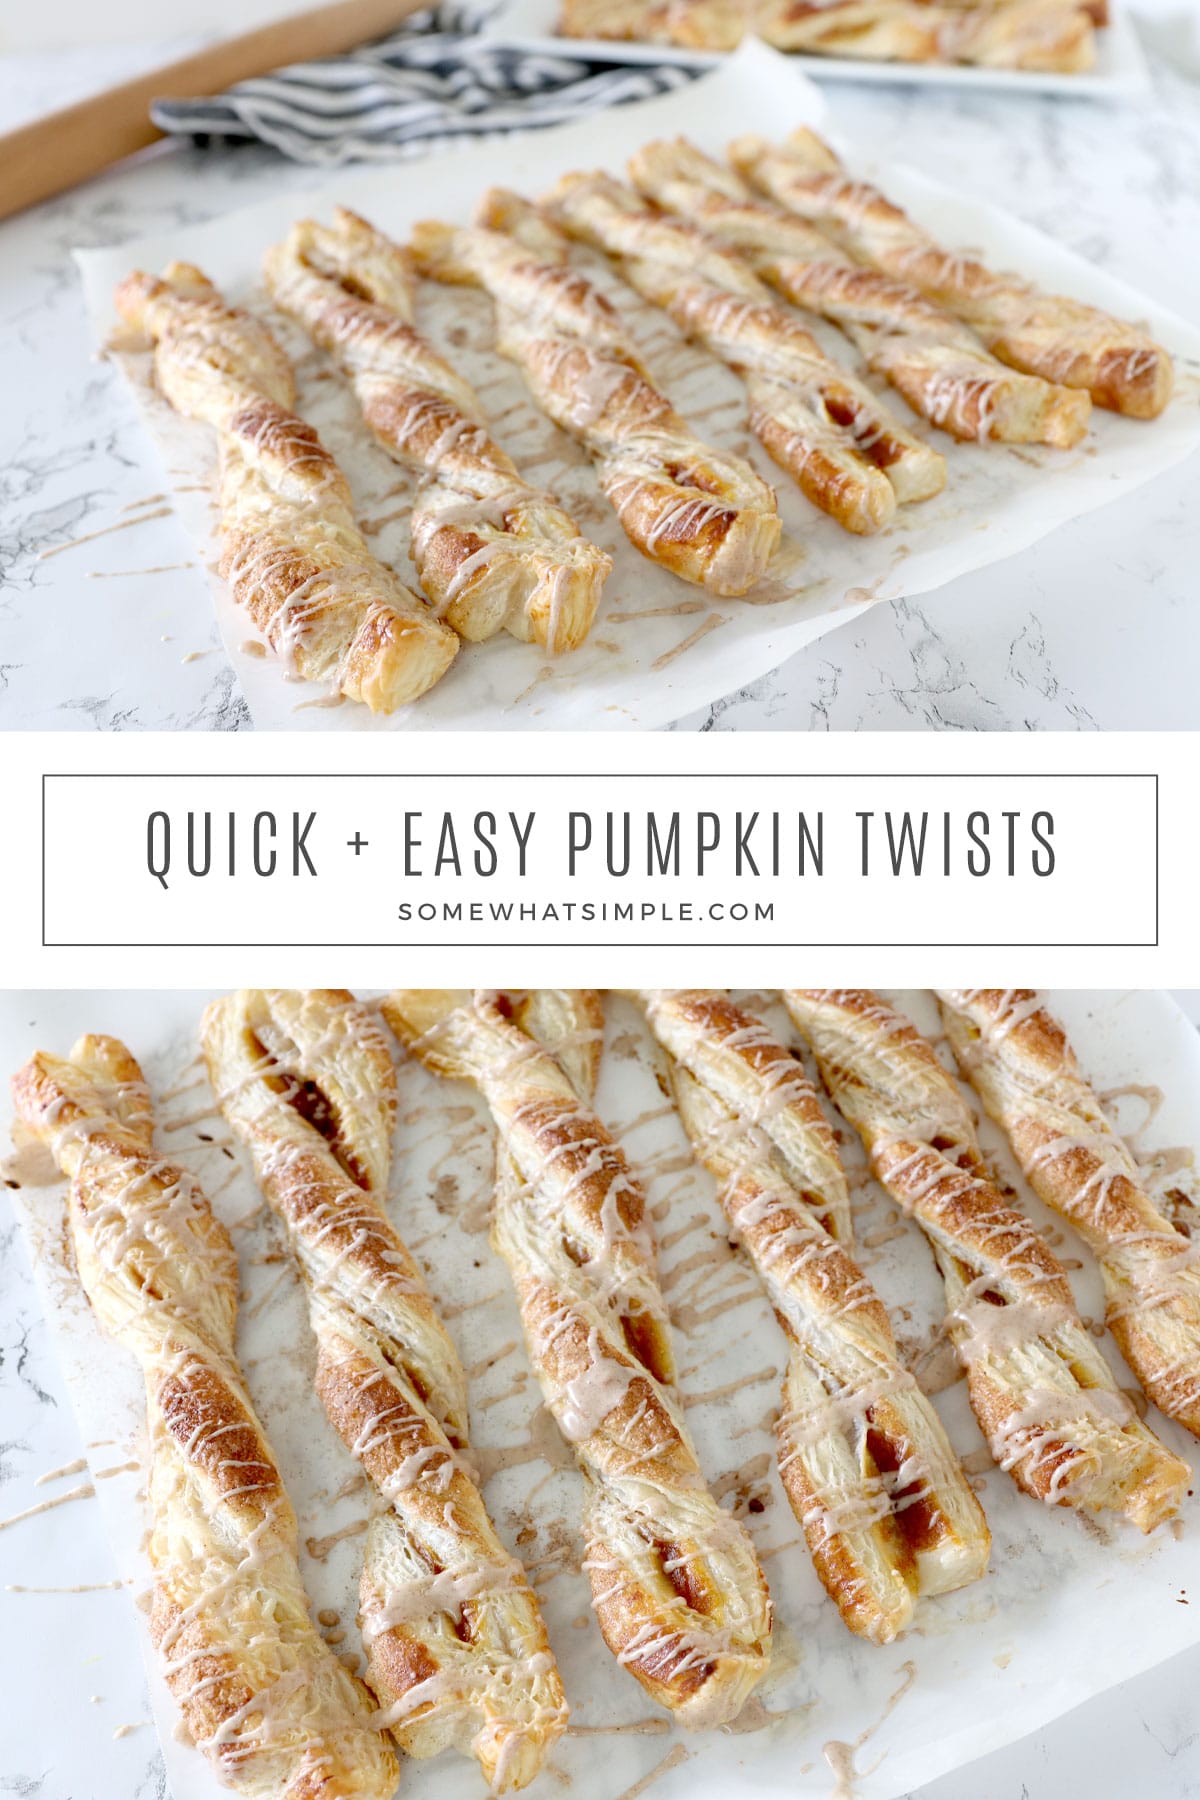 Pumpkin Pie Twists are a delicious treat that has all the flavors you love in a pumpkin pie! Plus they're super easy to make! via @somewhatsimple